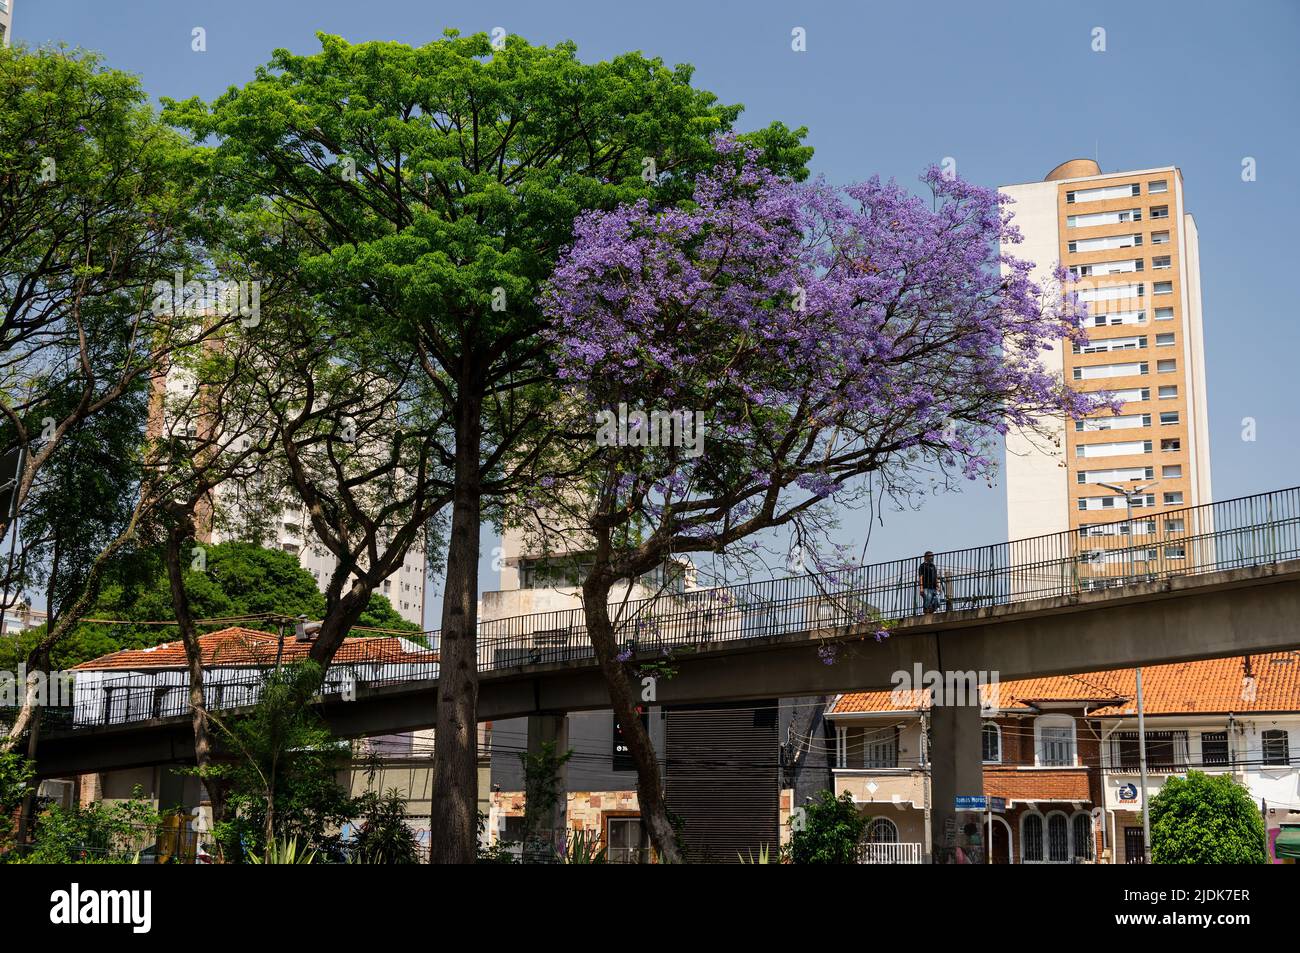 Tall trees full of green leaves and flowers of Tomas Morus square with Palmeiras Arrancada Heroica 1942 footbridge right below under sunny blue sky. Stock Photo